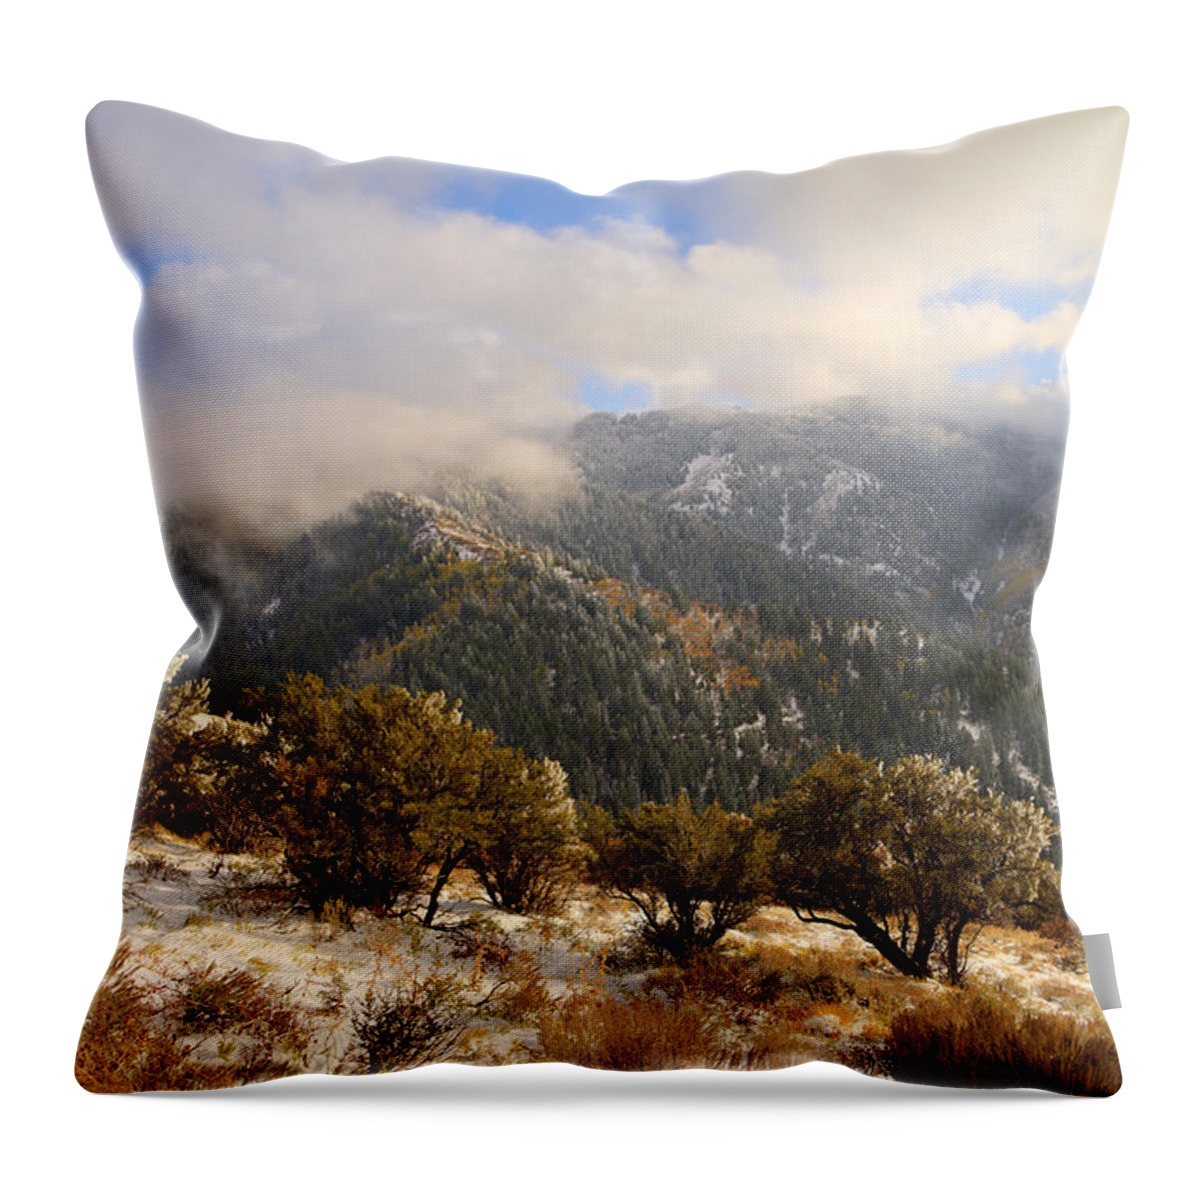 Storm Atop Oquirrhs Throw Pillow featuring the photograph Storm Atop Oquirrhs by Chad Dutson